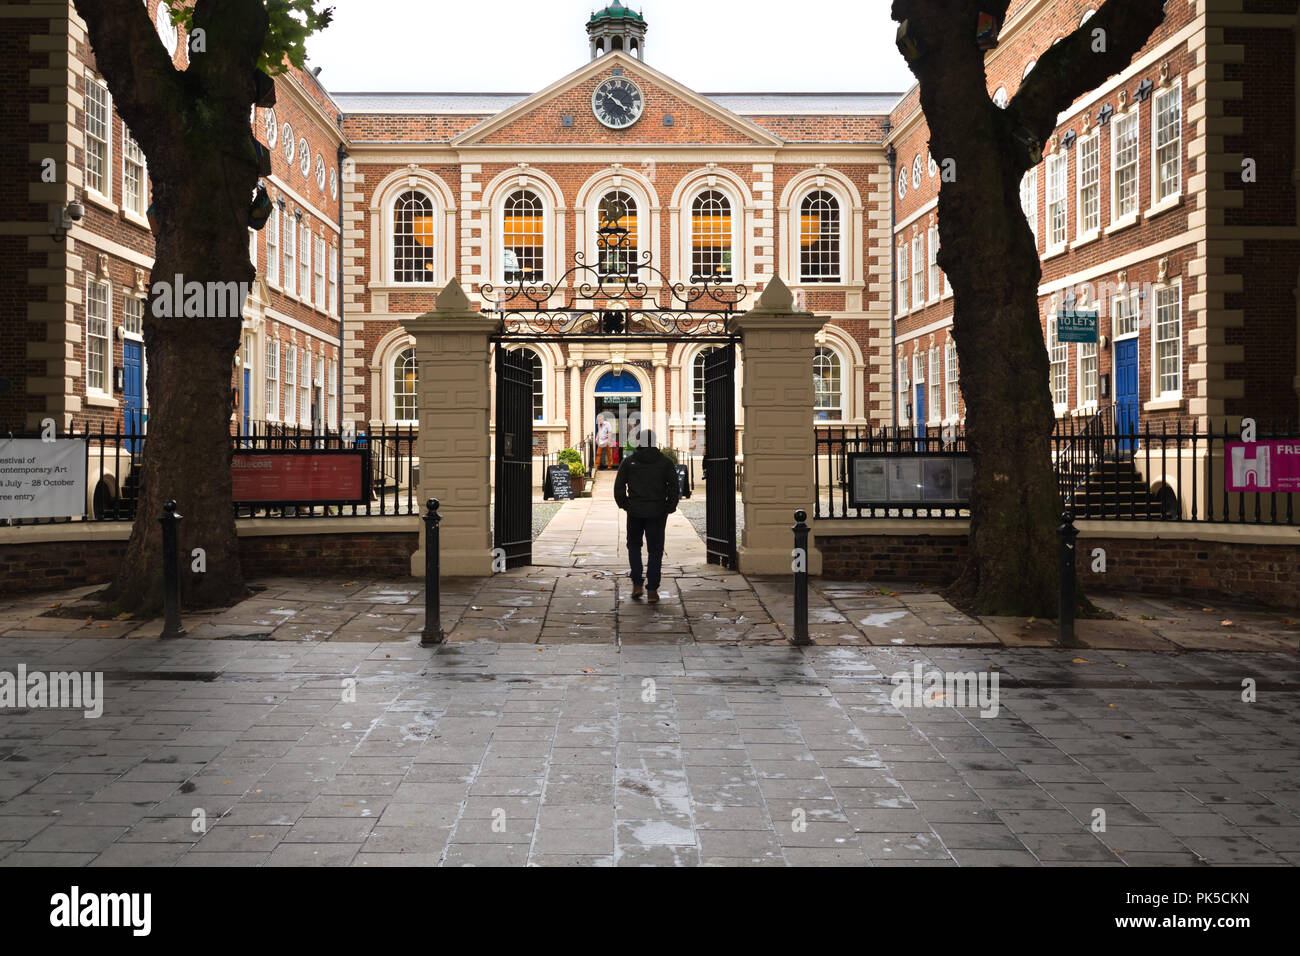 Bluecoat Chambers in School Lane is the oldest surviving building in central Liverpool, England. Stock Photo